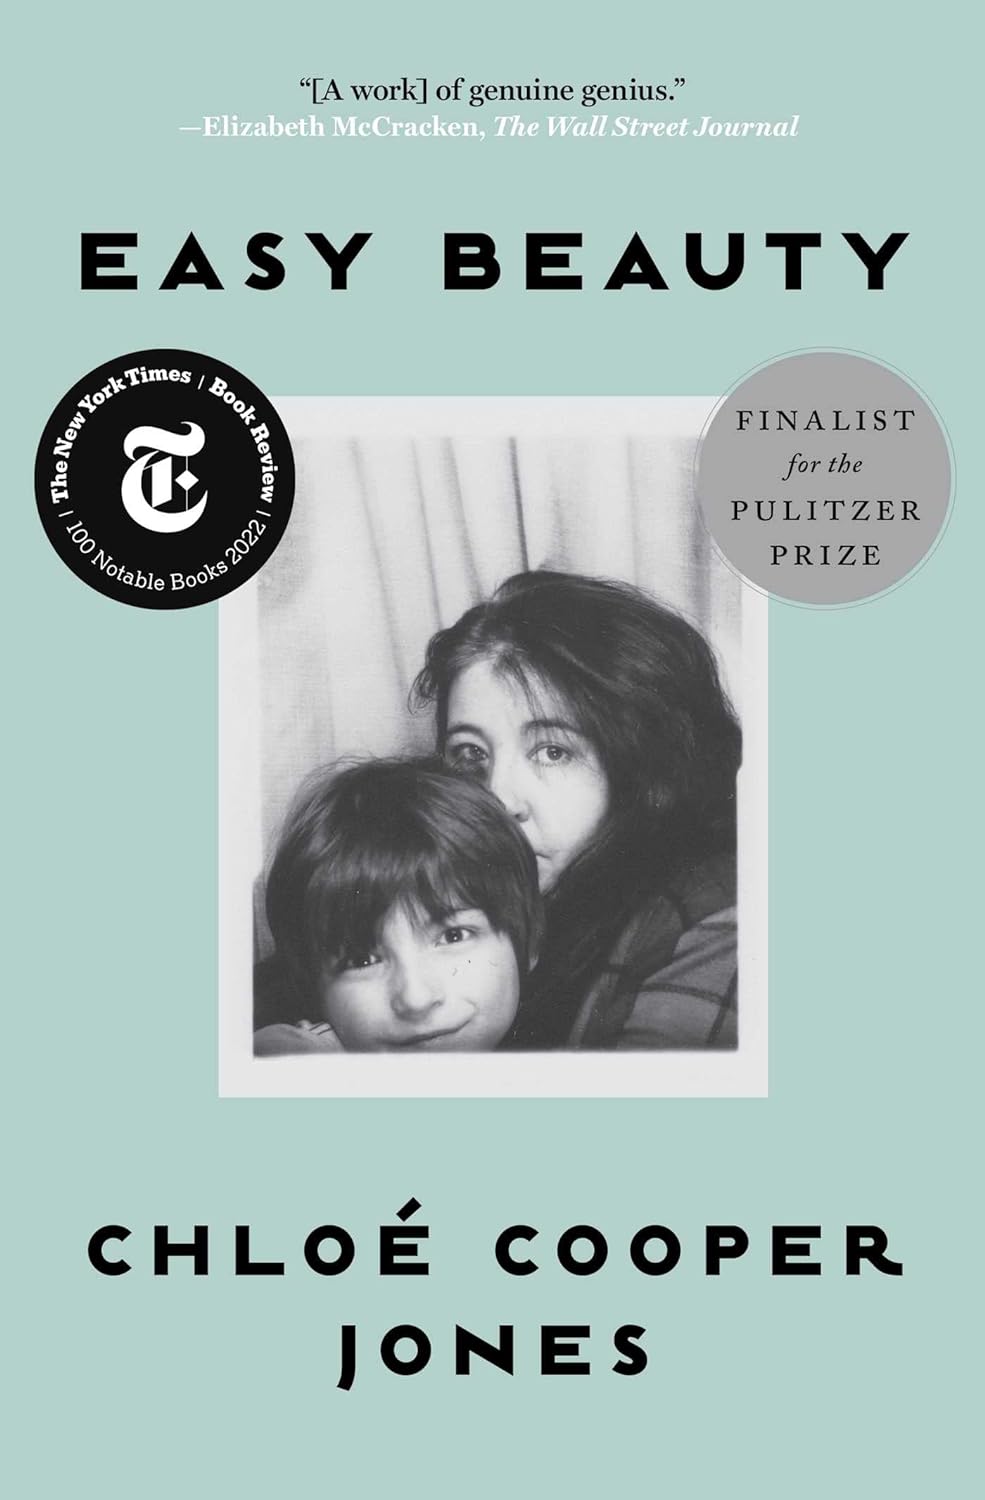 Image for "Easy Beauty"